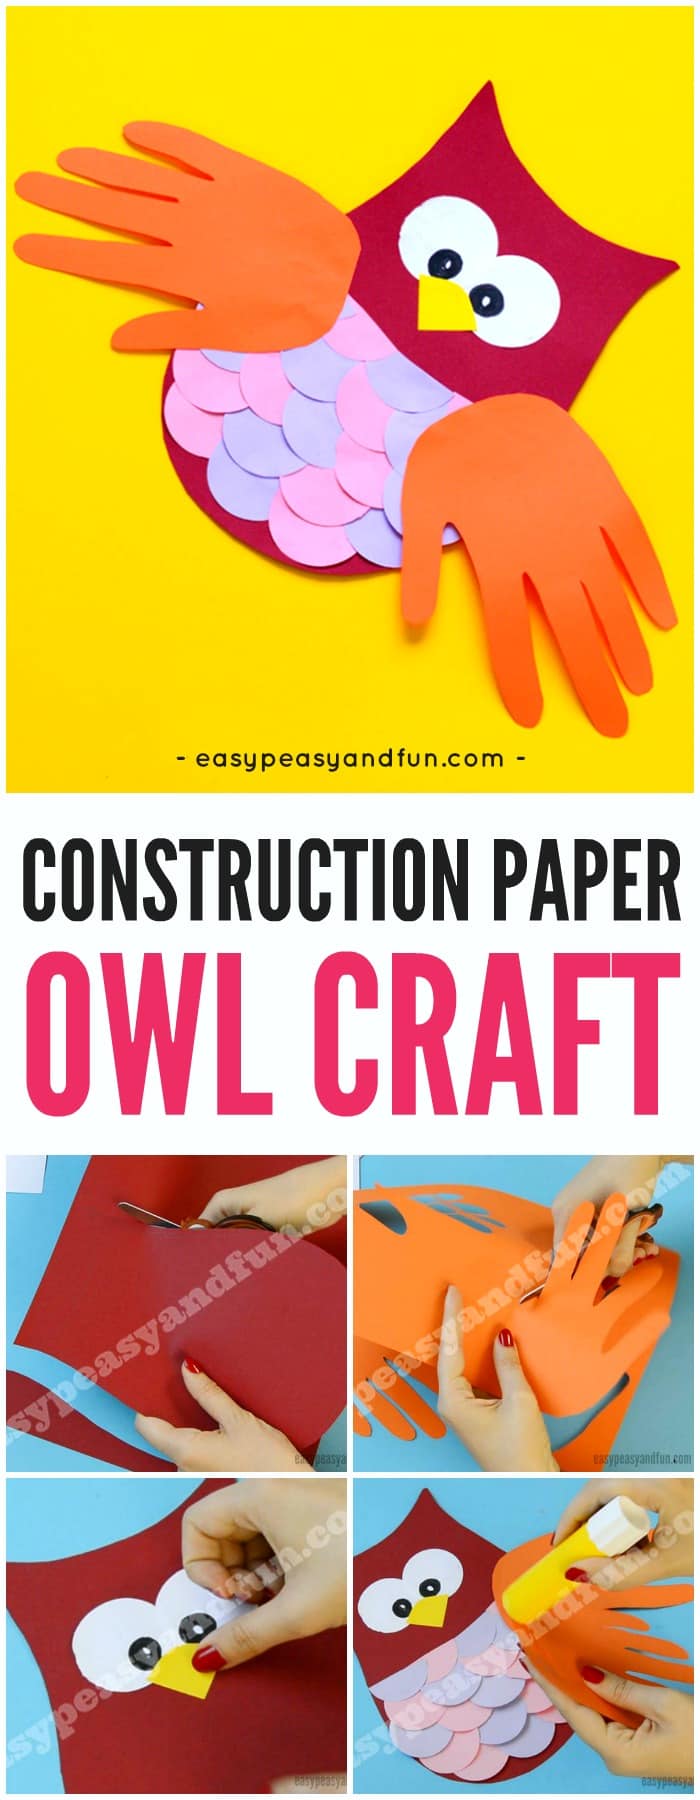 Cute Construction Paper Owl Craft for Kids to Make. Fun fall craft idea.